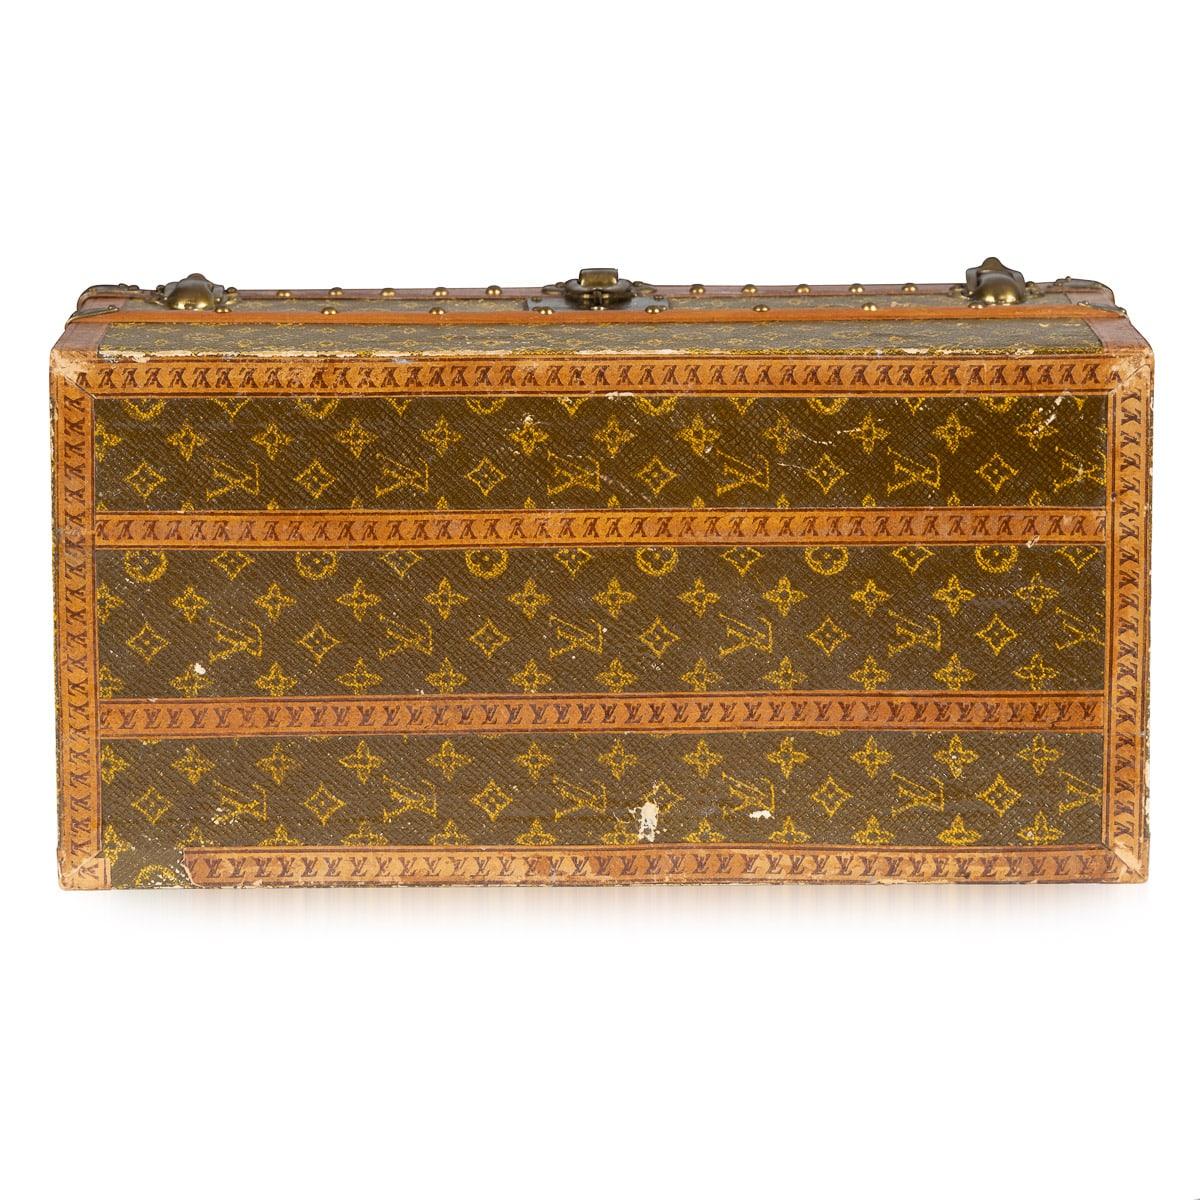 French 20th Century, Extremely Rare Louis Vuitton 